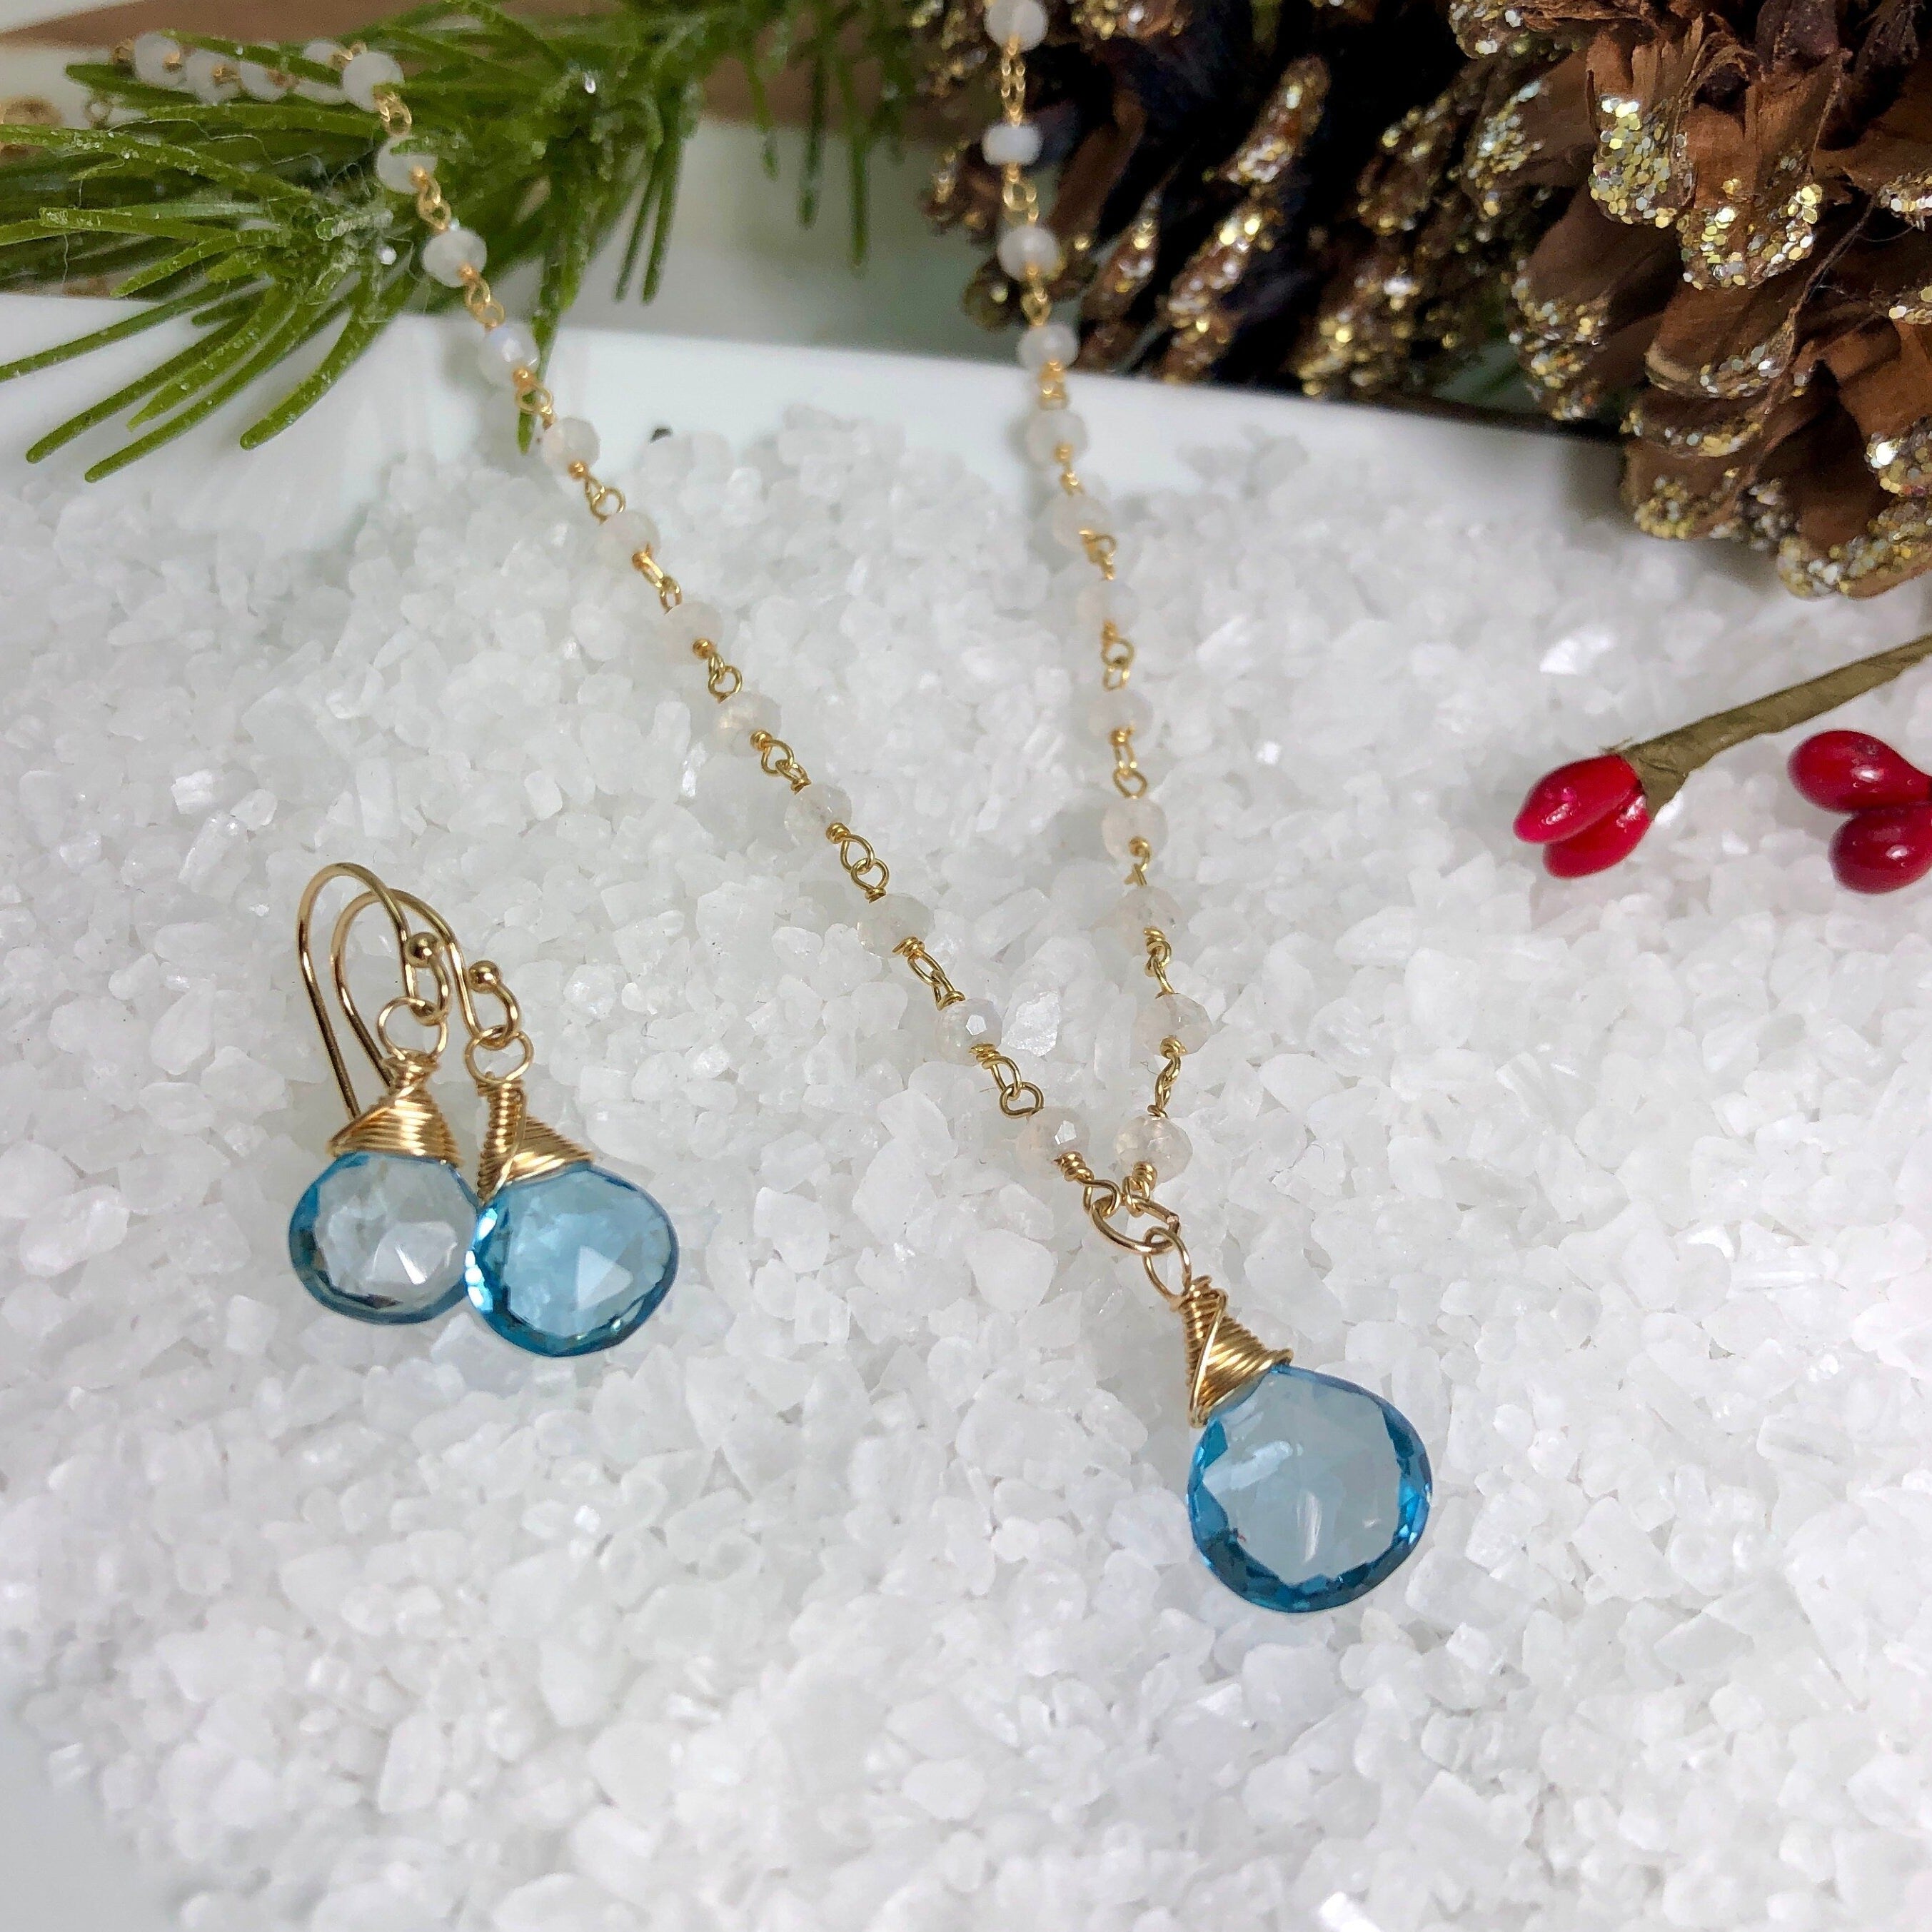 London Blue and Swiss Blue Topaz Drop Pendant Necklace in 14k Yellow Gold  by Lali - Nelson Coleman Jewelers